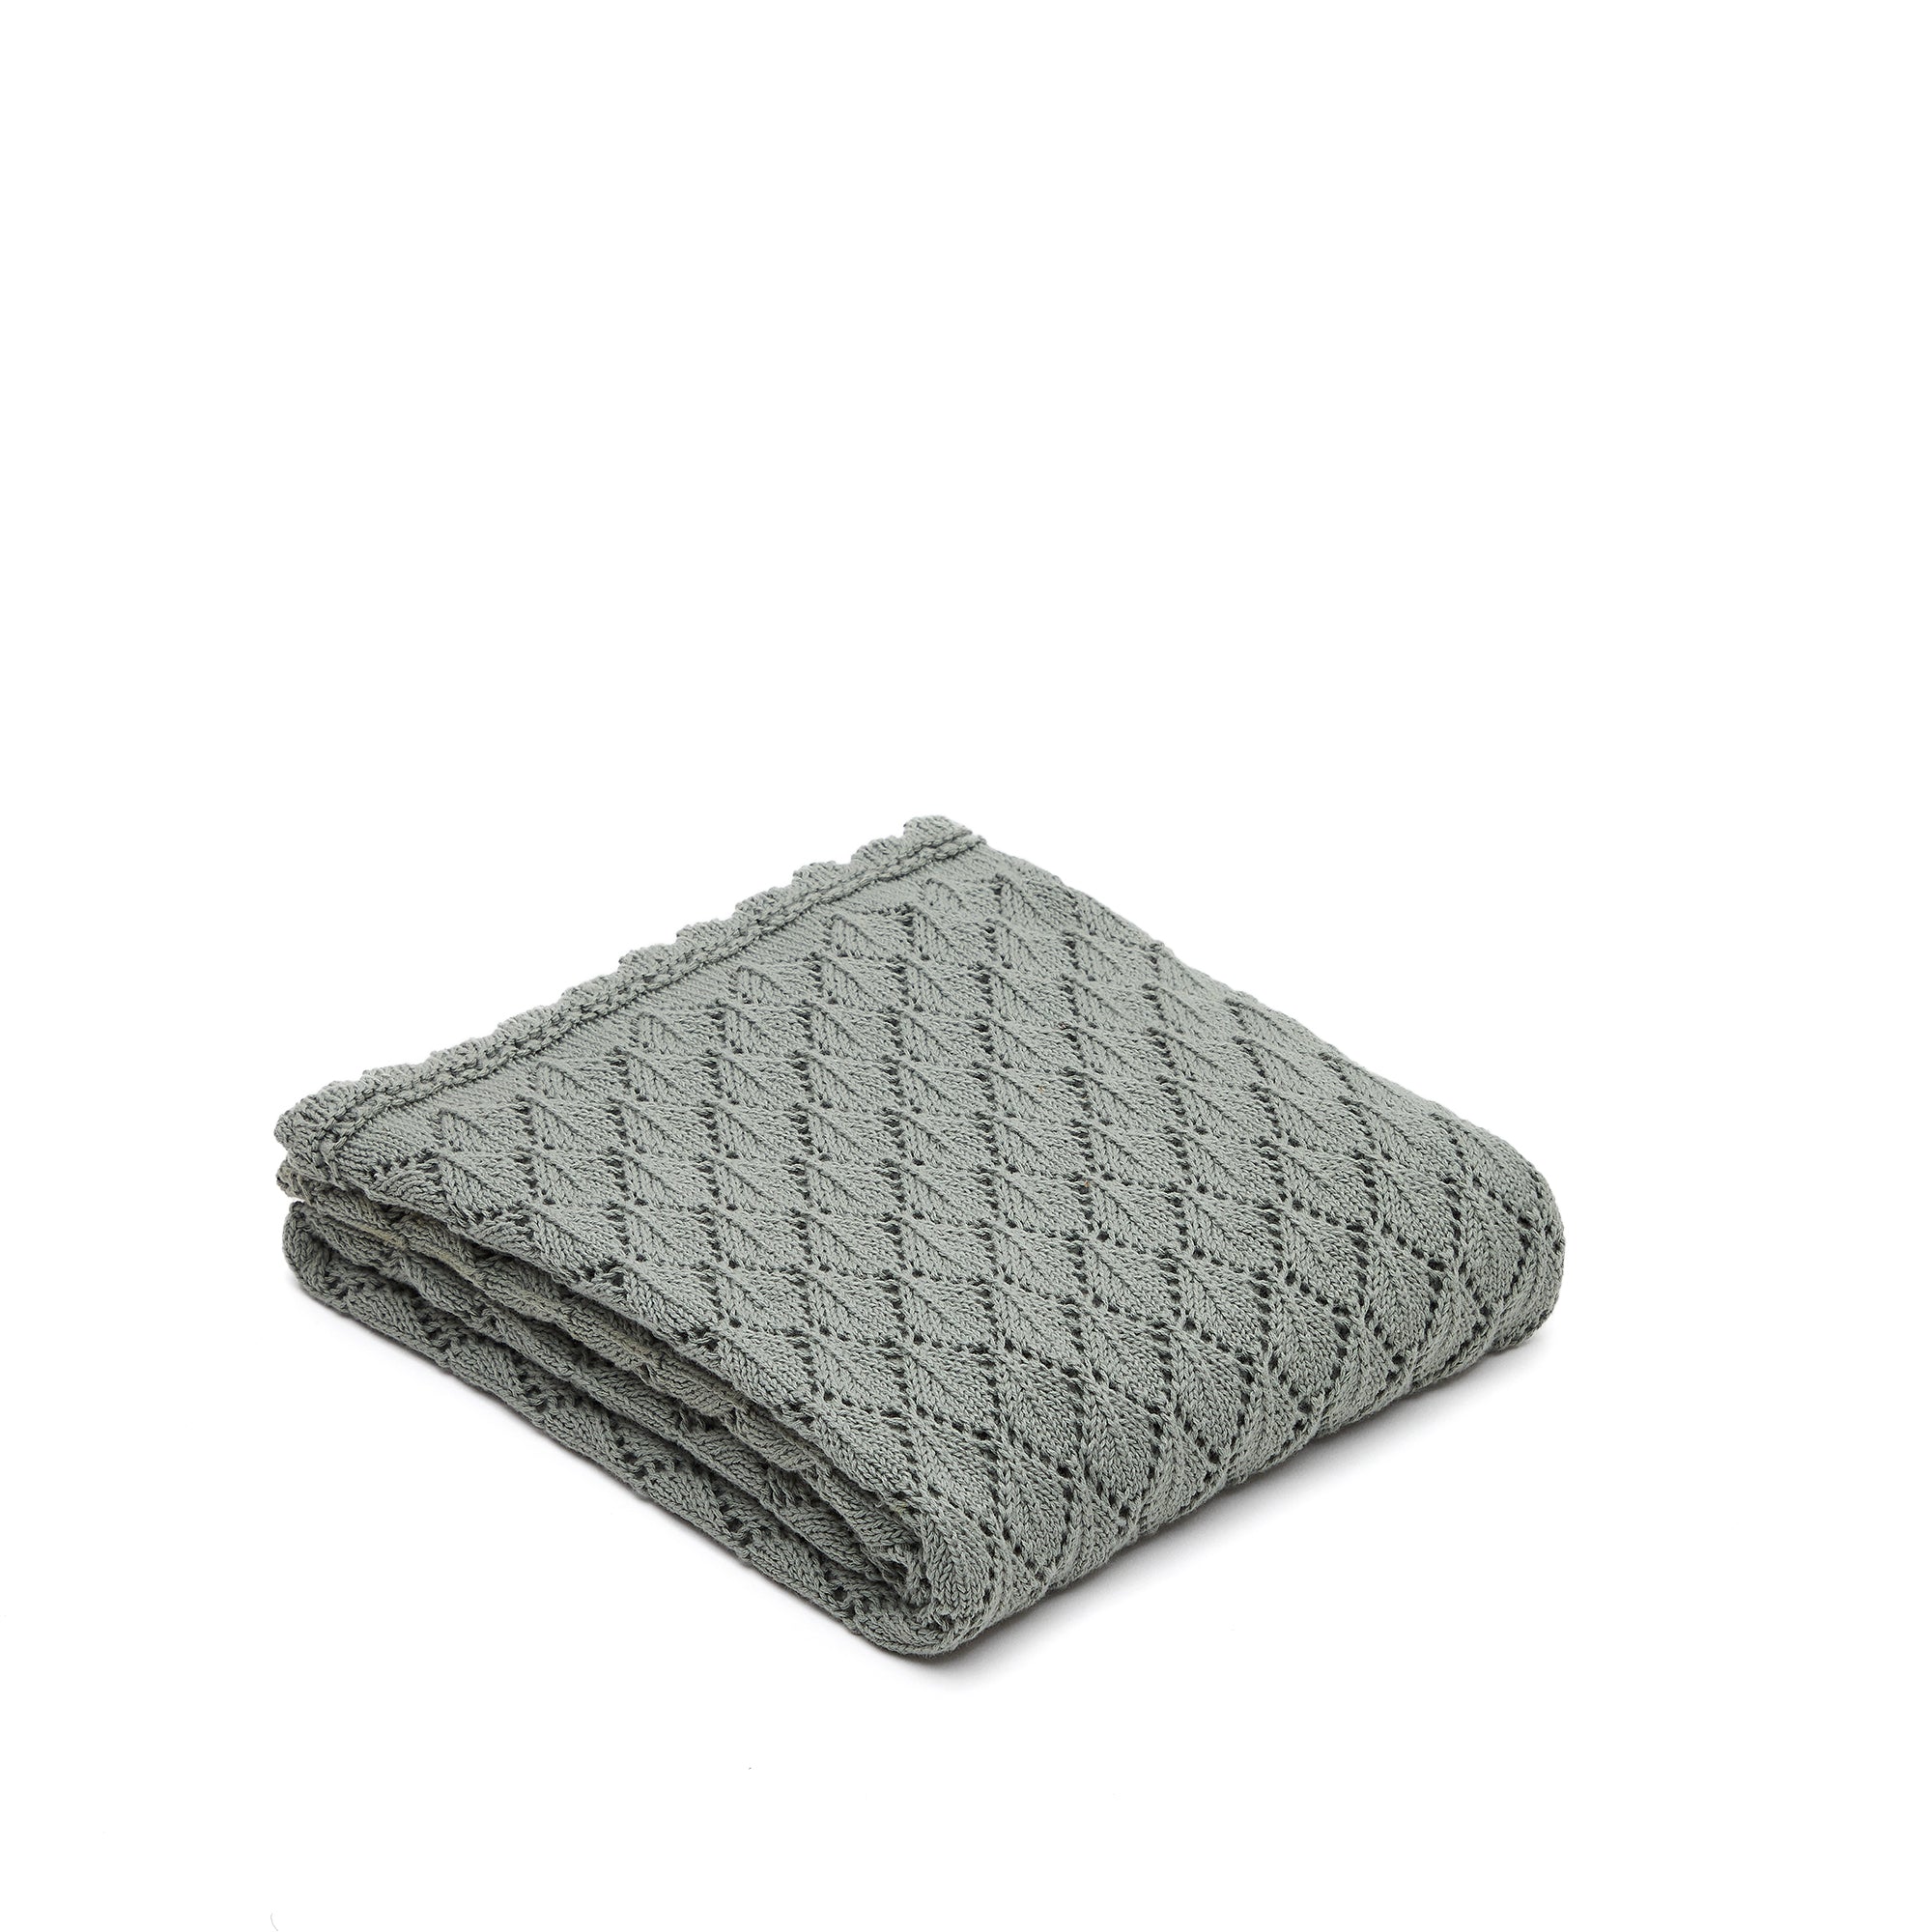 Ria green knitted blanket, 70 x 100 cm